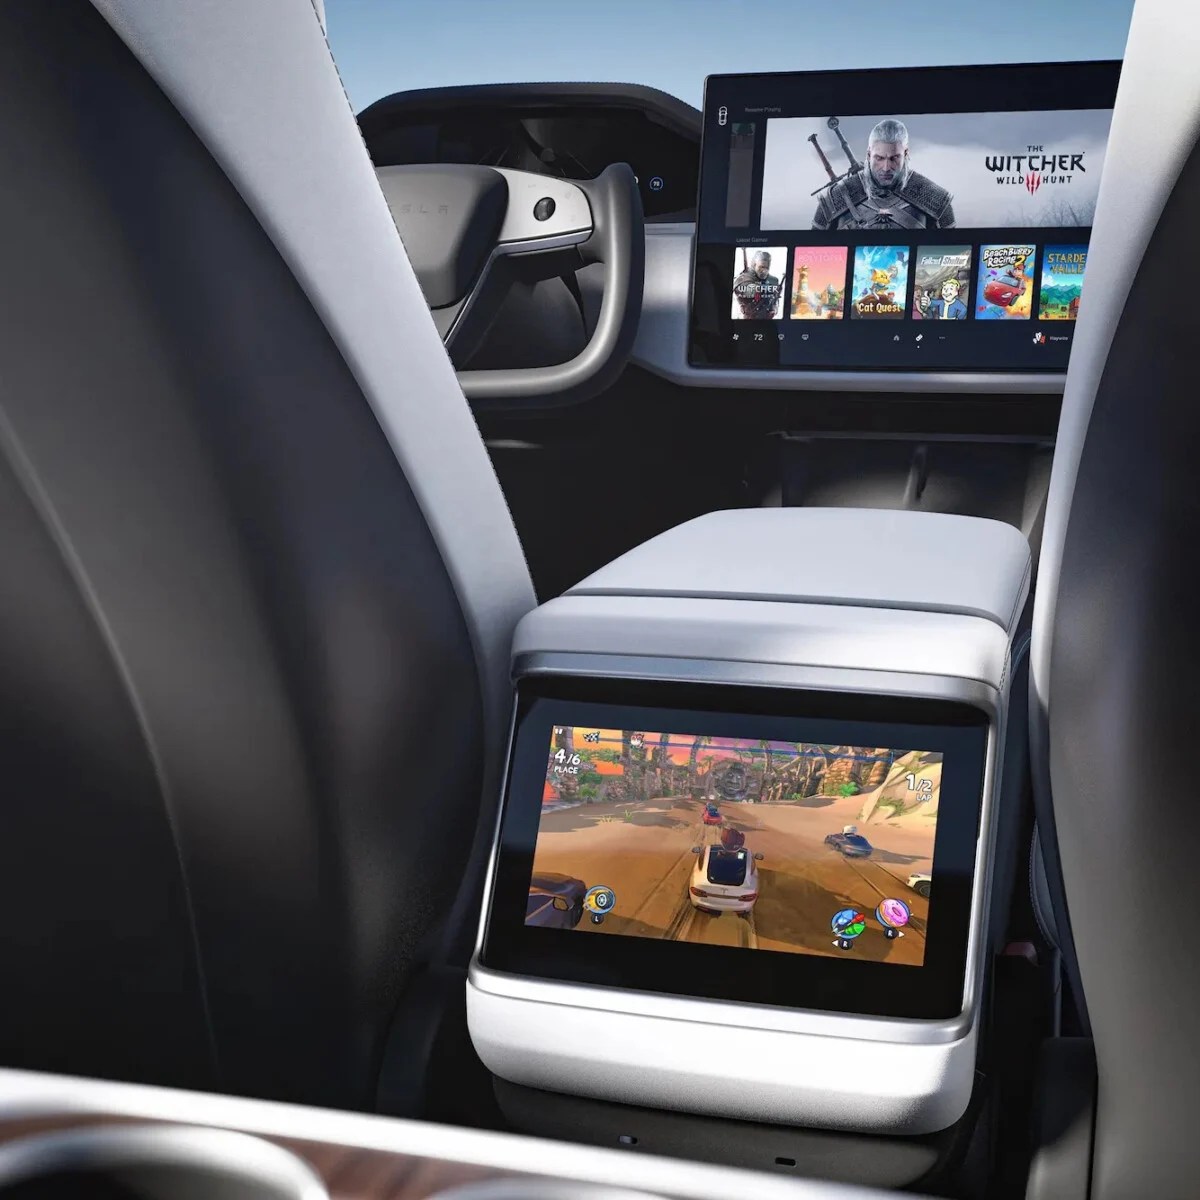 Tesla cars will become game consoles thanks to Steam